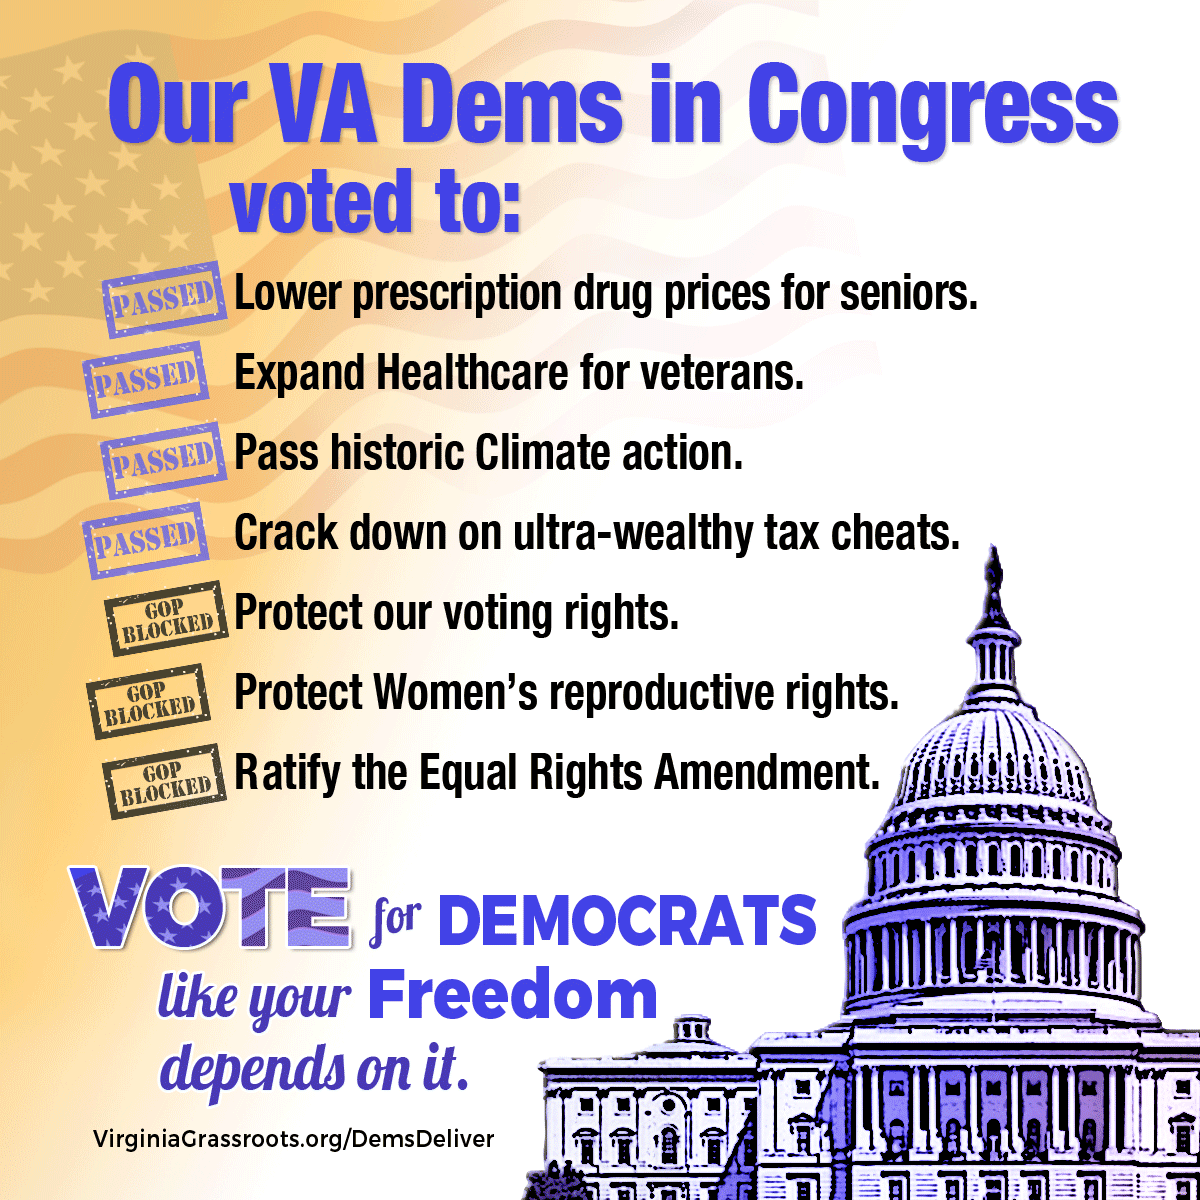 Virginia Democrats ALL voted for healthcare, clean energy, Veteran's benefits, and other legislation that will improve people's lives.